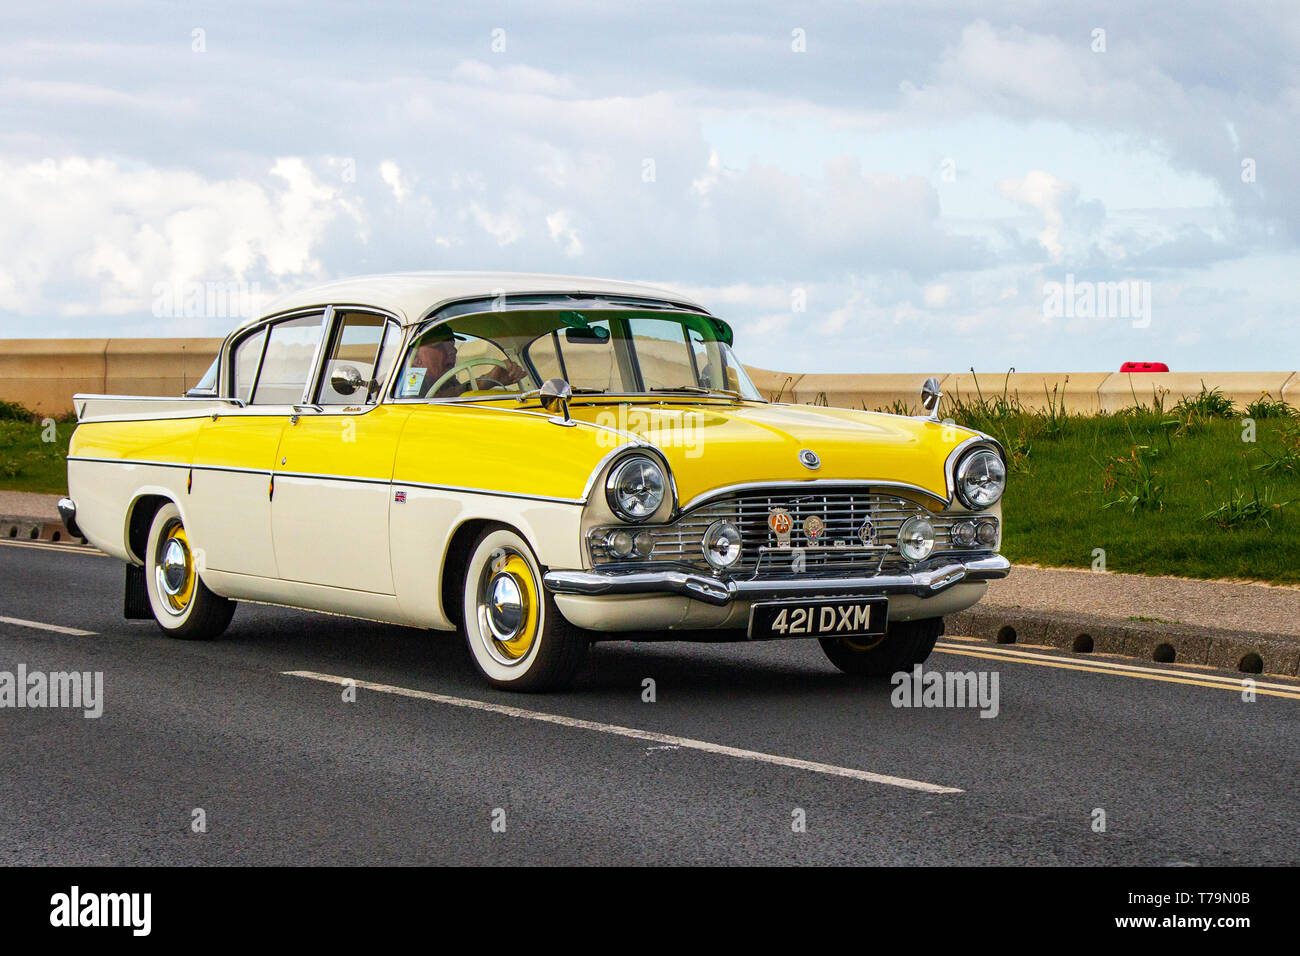 1962 60s yellow Vauxhall Cresta at Cleveleys Spring Car Show at Jubilee Gardens. A new location for Classic cars, veteran, retro collectible, restored, cherished old timers, heritage event, vintage, automobile Vehicle show by Blackpool Vehicle Preservation Group (BVPG). Stock Photo